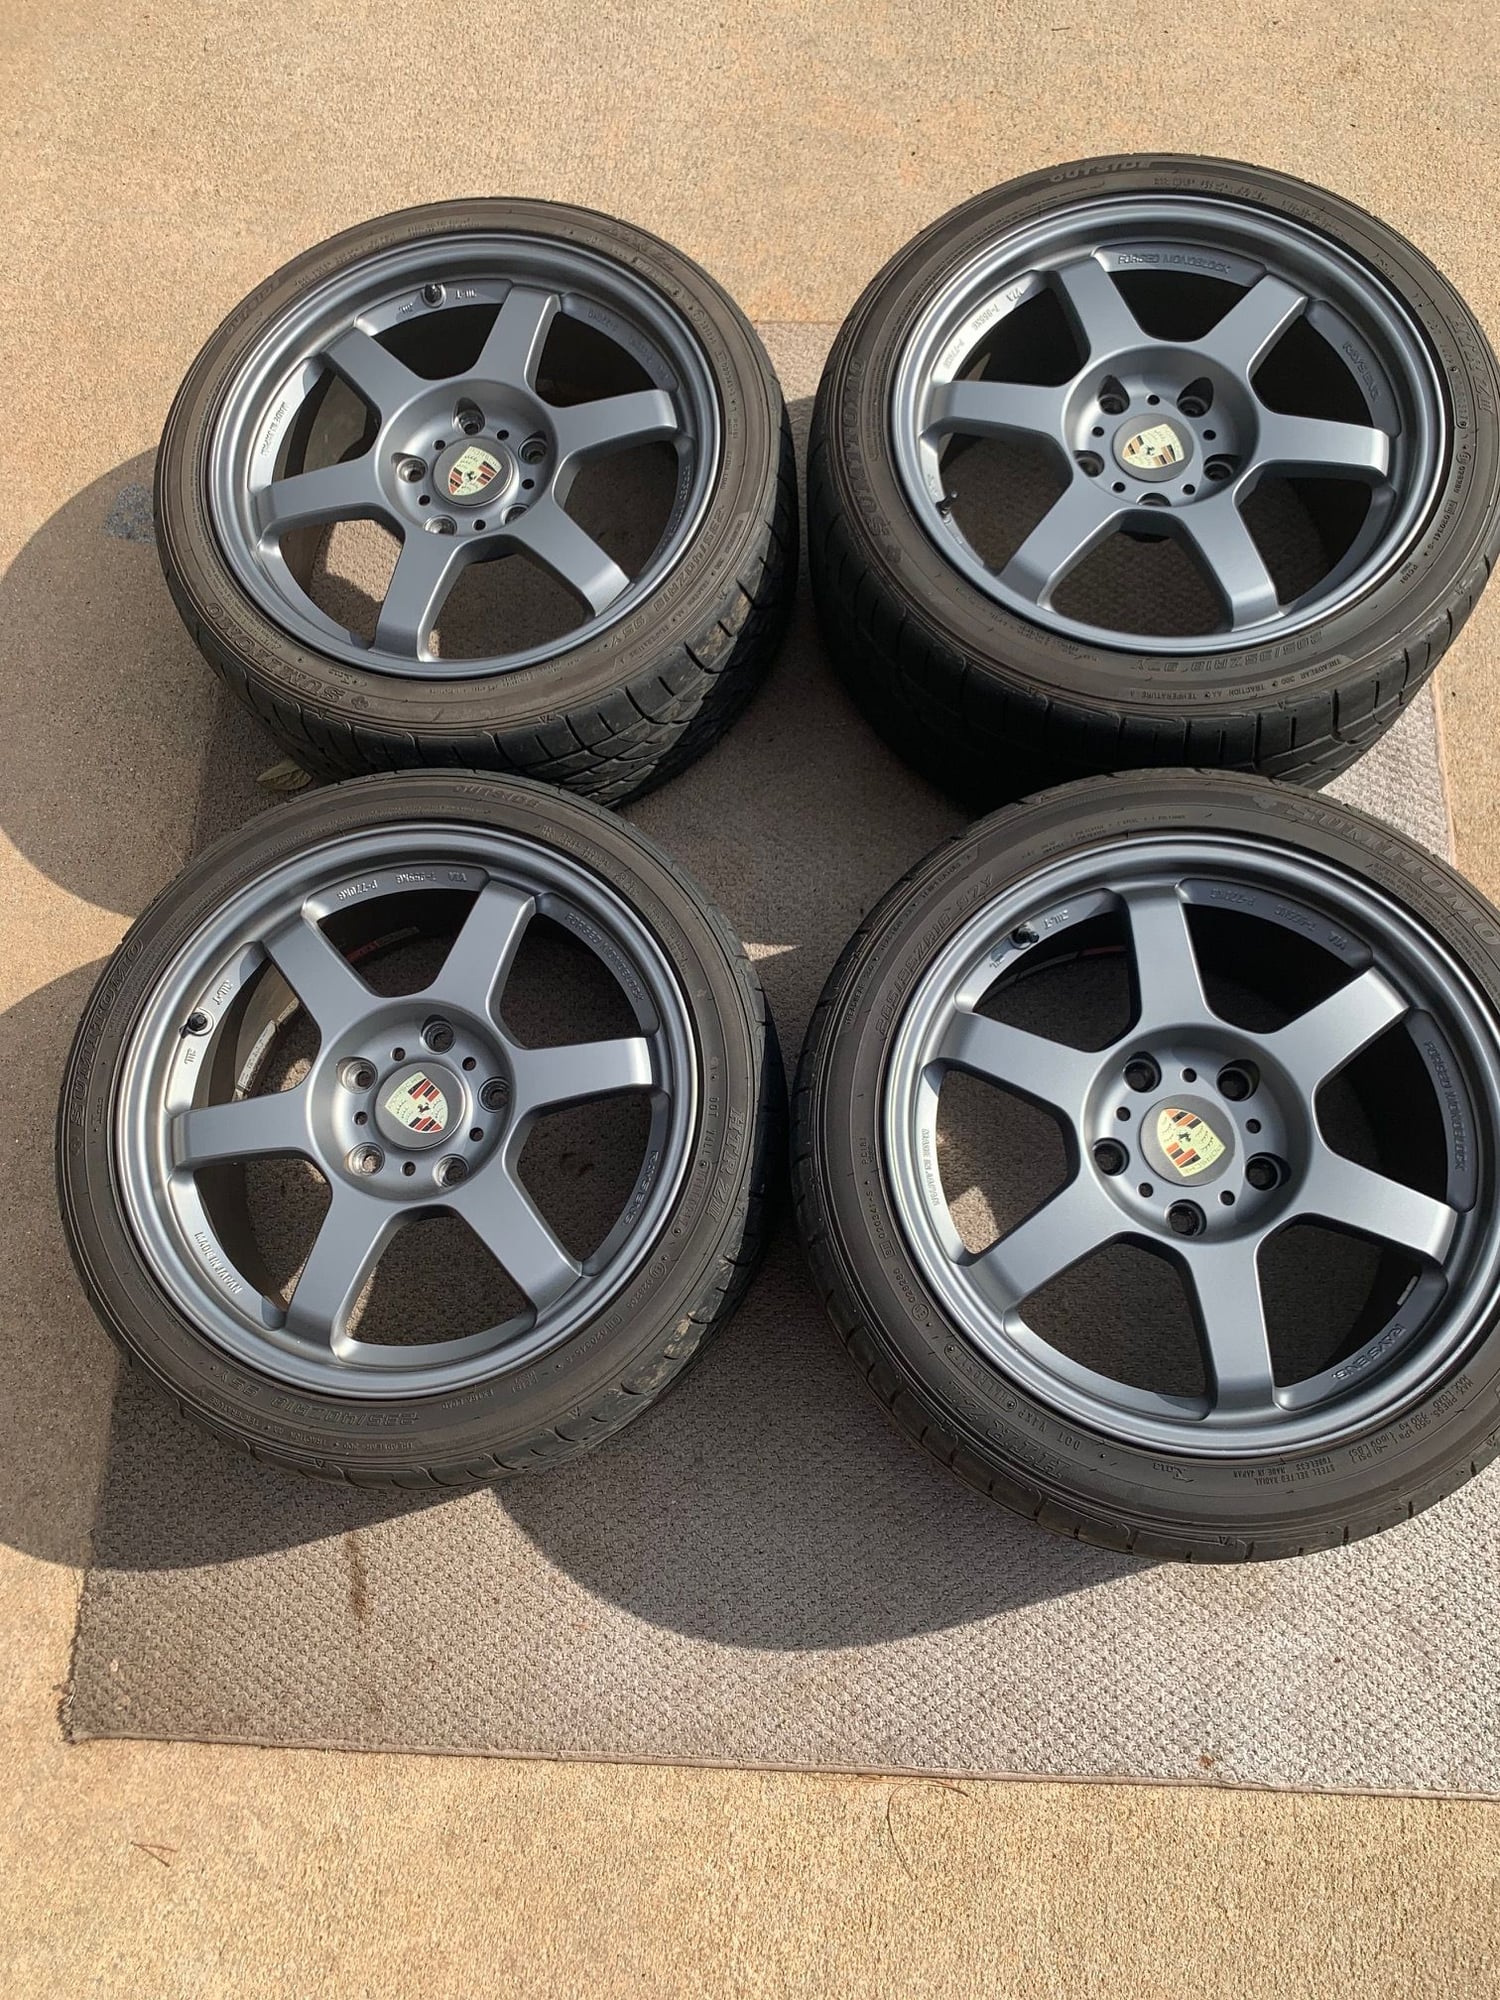 Wheels and Tires/Axles - Volk Racing TE37 18" Wheels - Used - 1997 to 2022 Porsche All Models - Easley, SC 29640, United States